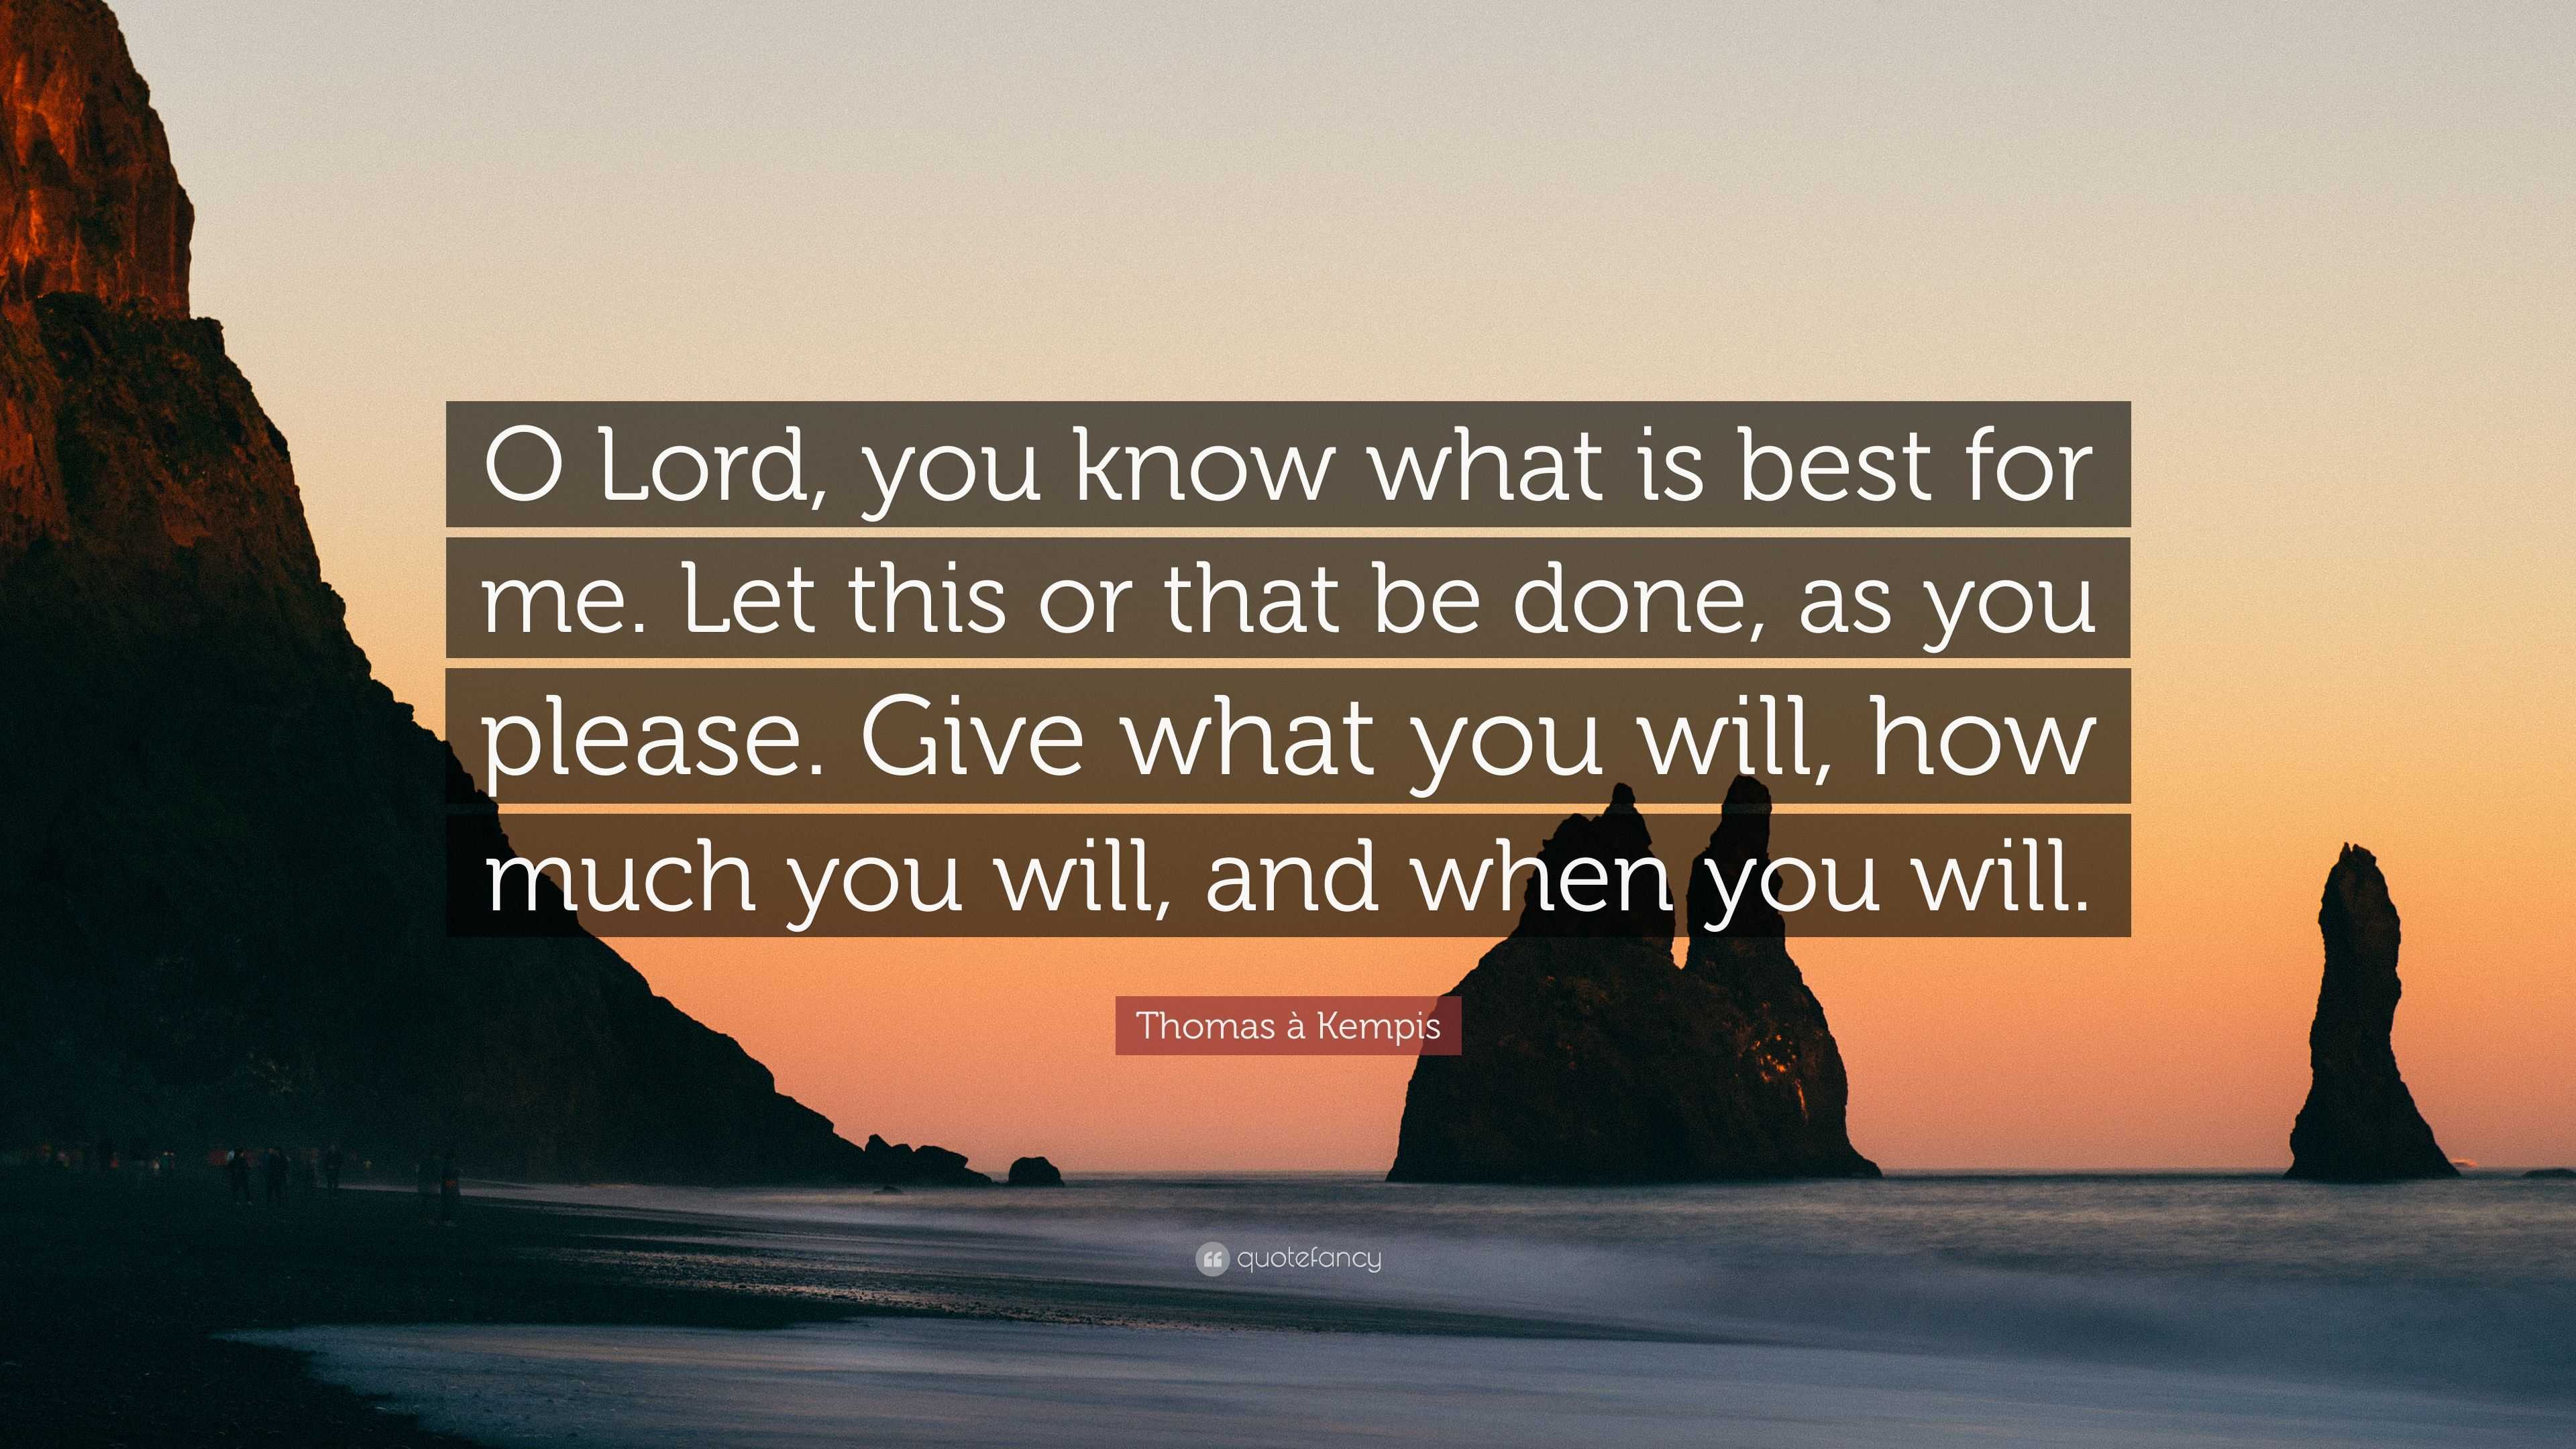 Thomas A Kempis Quote O Lord You Know What Is Best For Me Let This Or That Be Done As You Please Give What You Will How Much You Will An